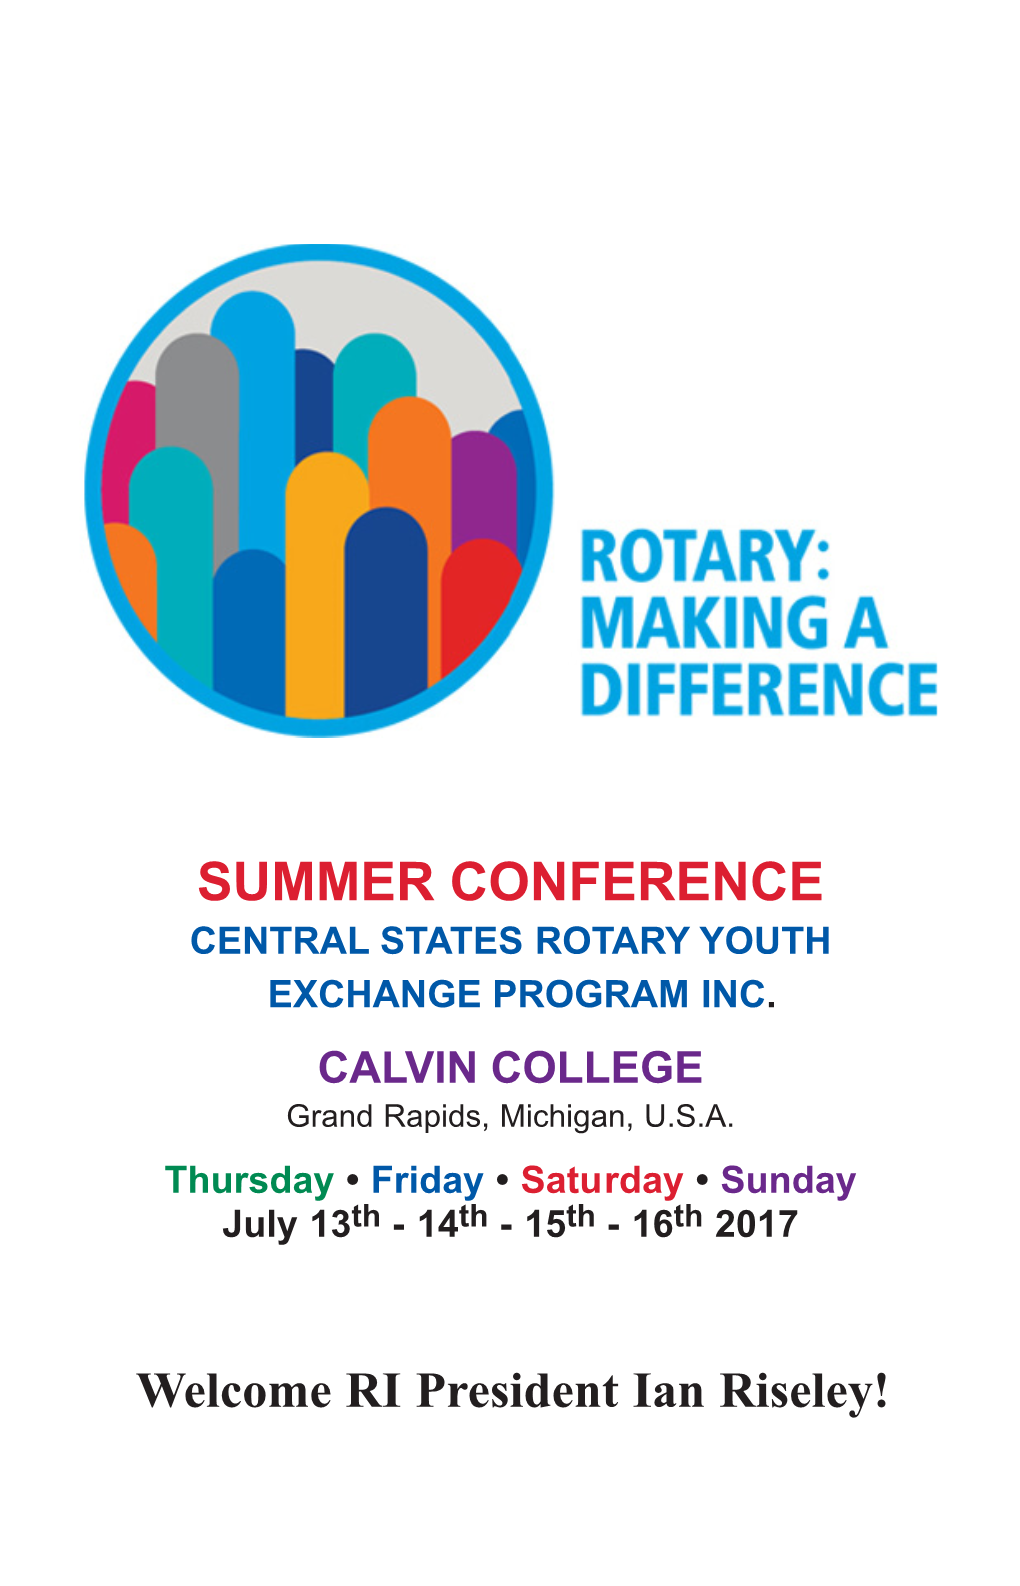 Summer Conference Central States Rotary Youth Exchange Program Inc